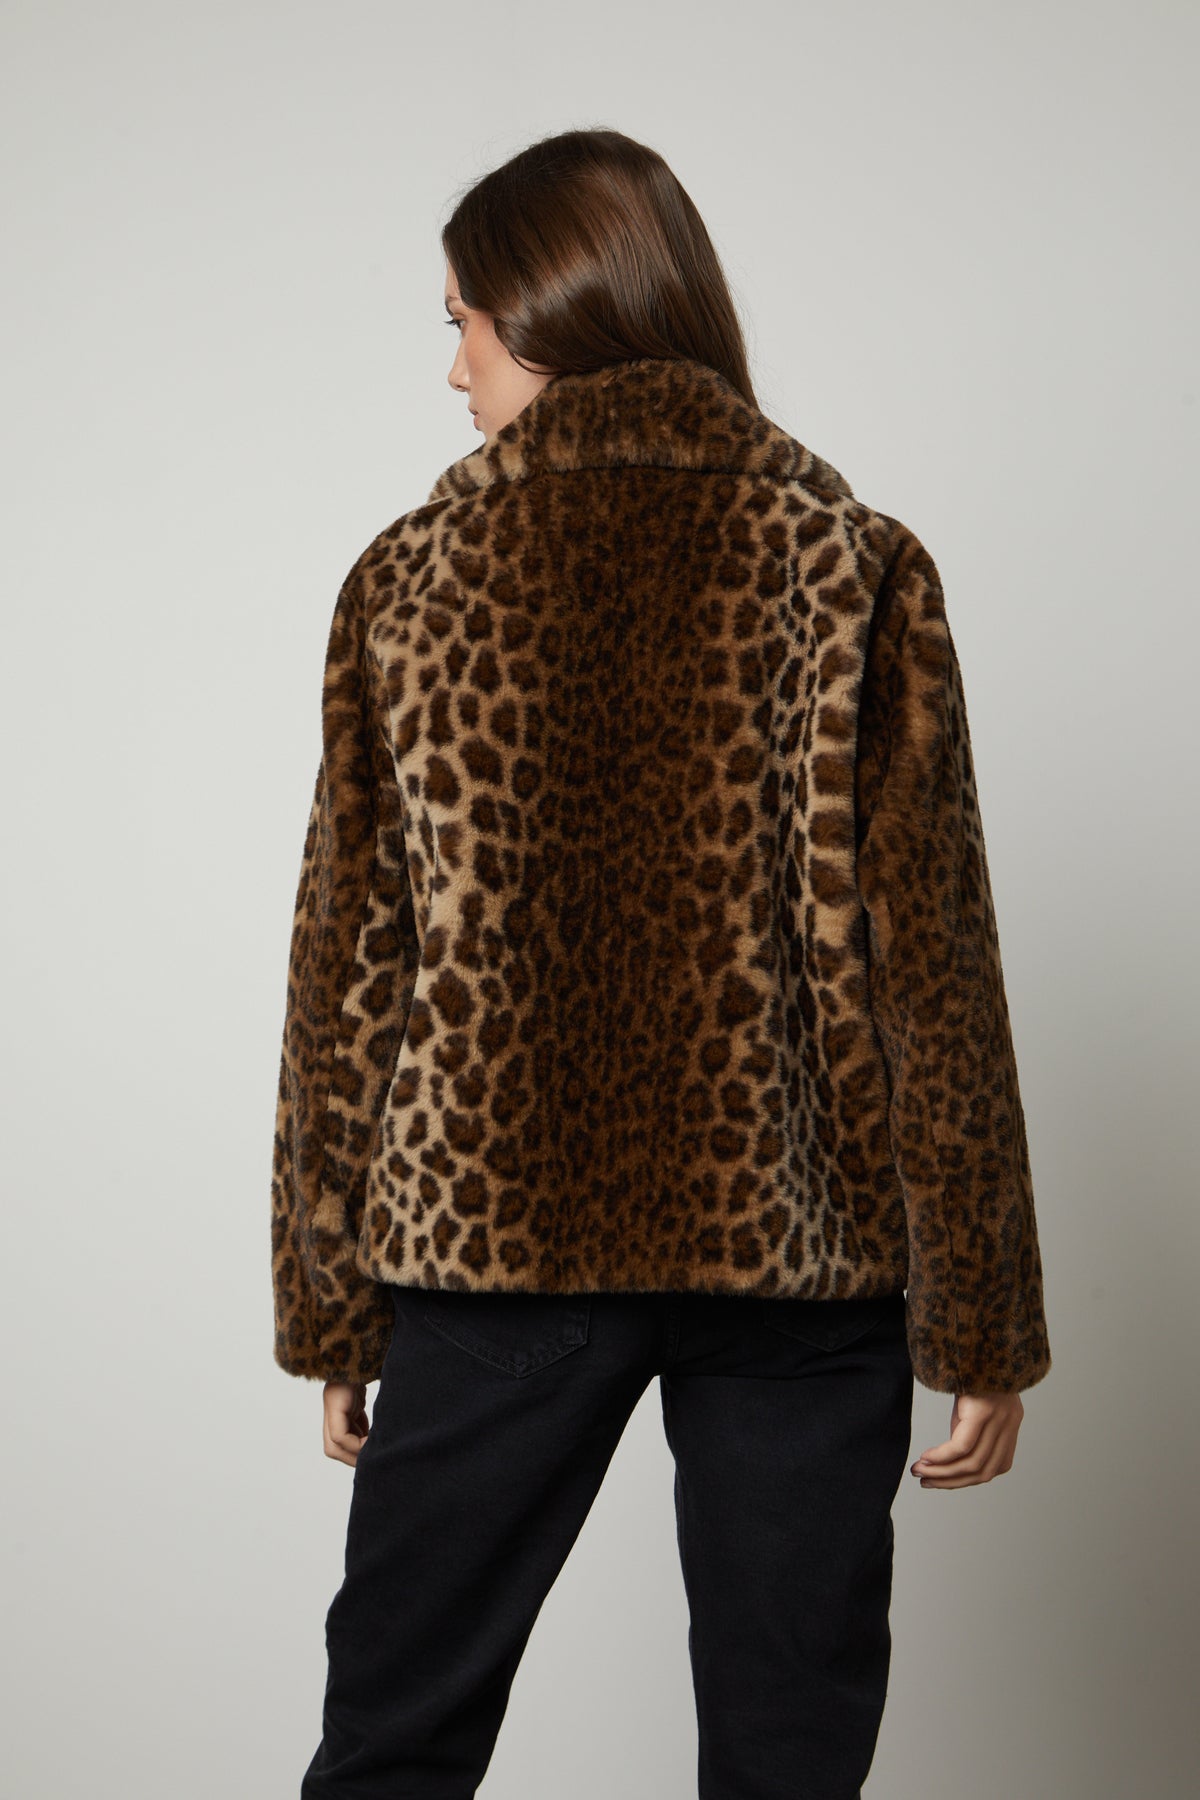   The back view of a woman wearing a Velvet by Graham & Spencer AMANI LEOPARD LUX FAUX FUR JACKET. 